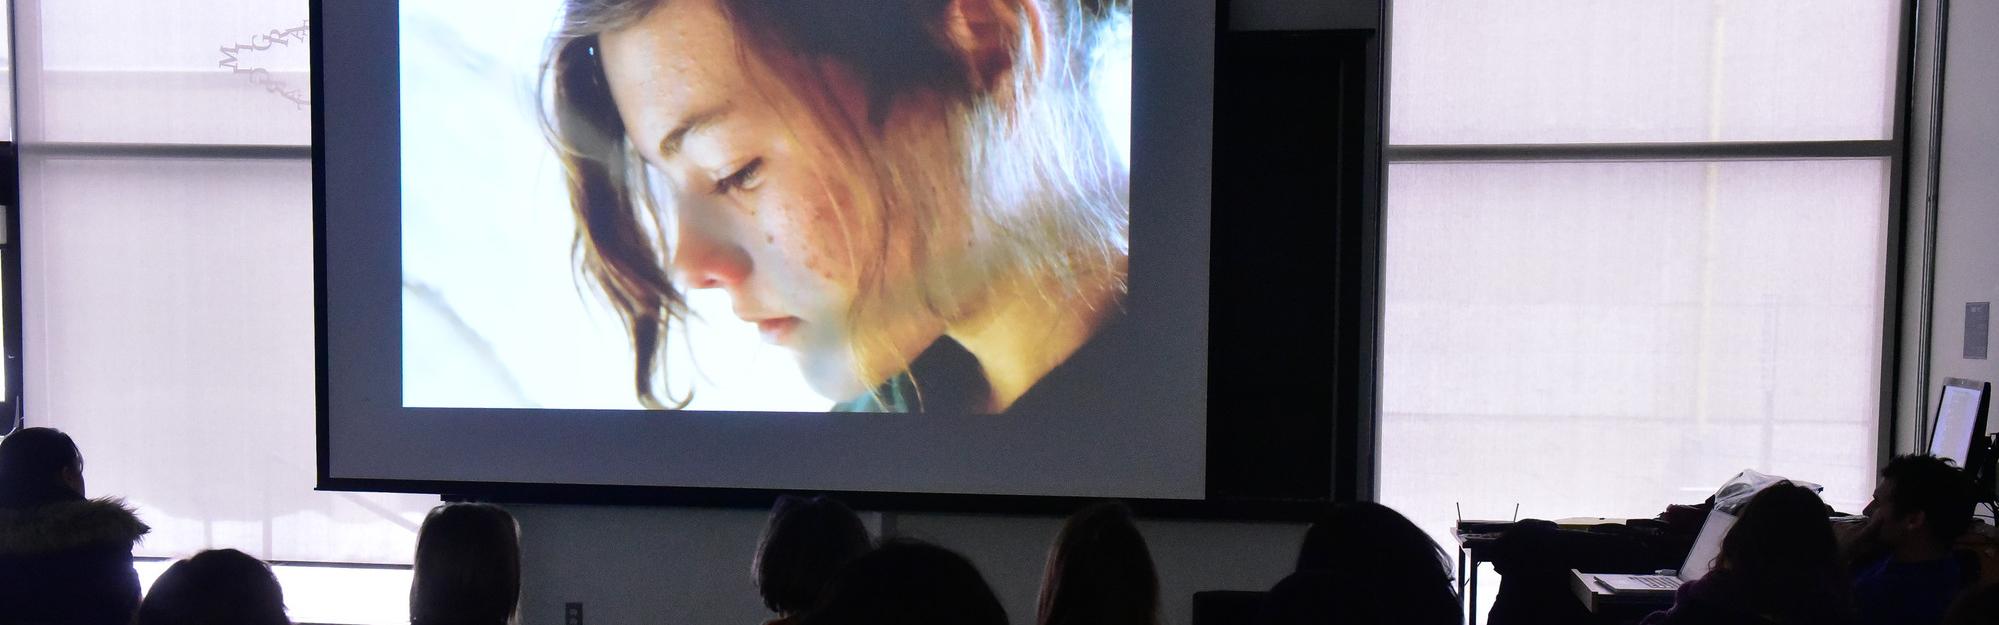 A still from a film, close shot of a young woman's face, with students watching the screen in the foreground